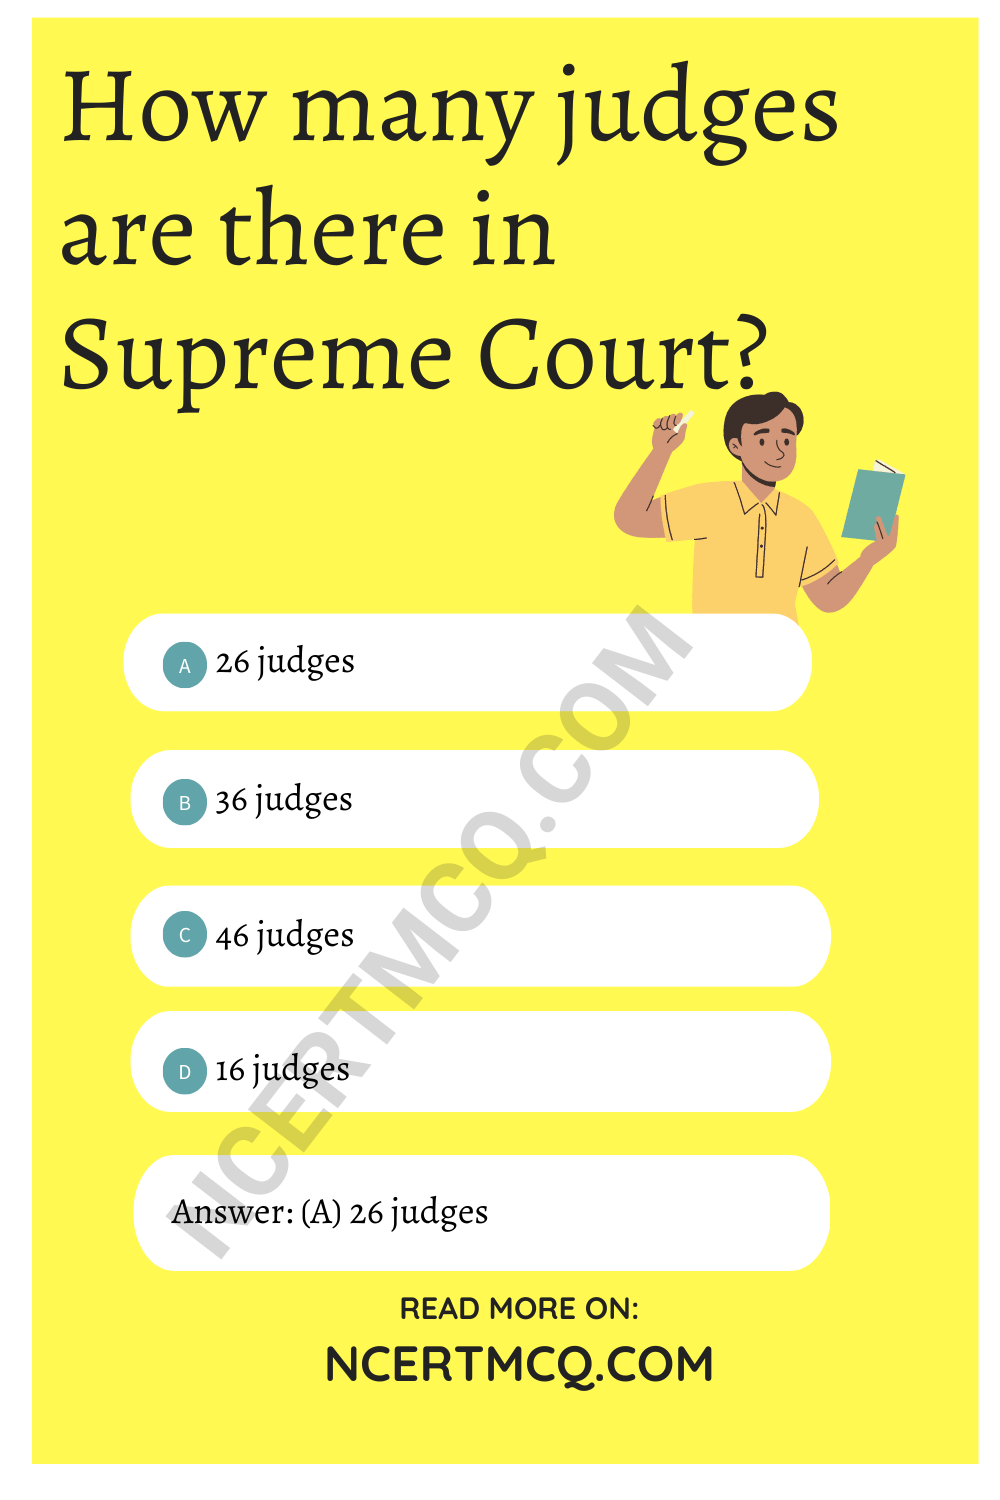 How many judges are there in Supreme Court?